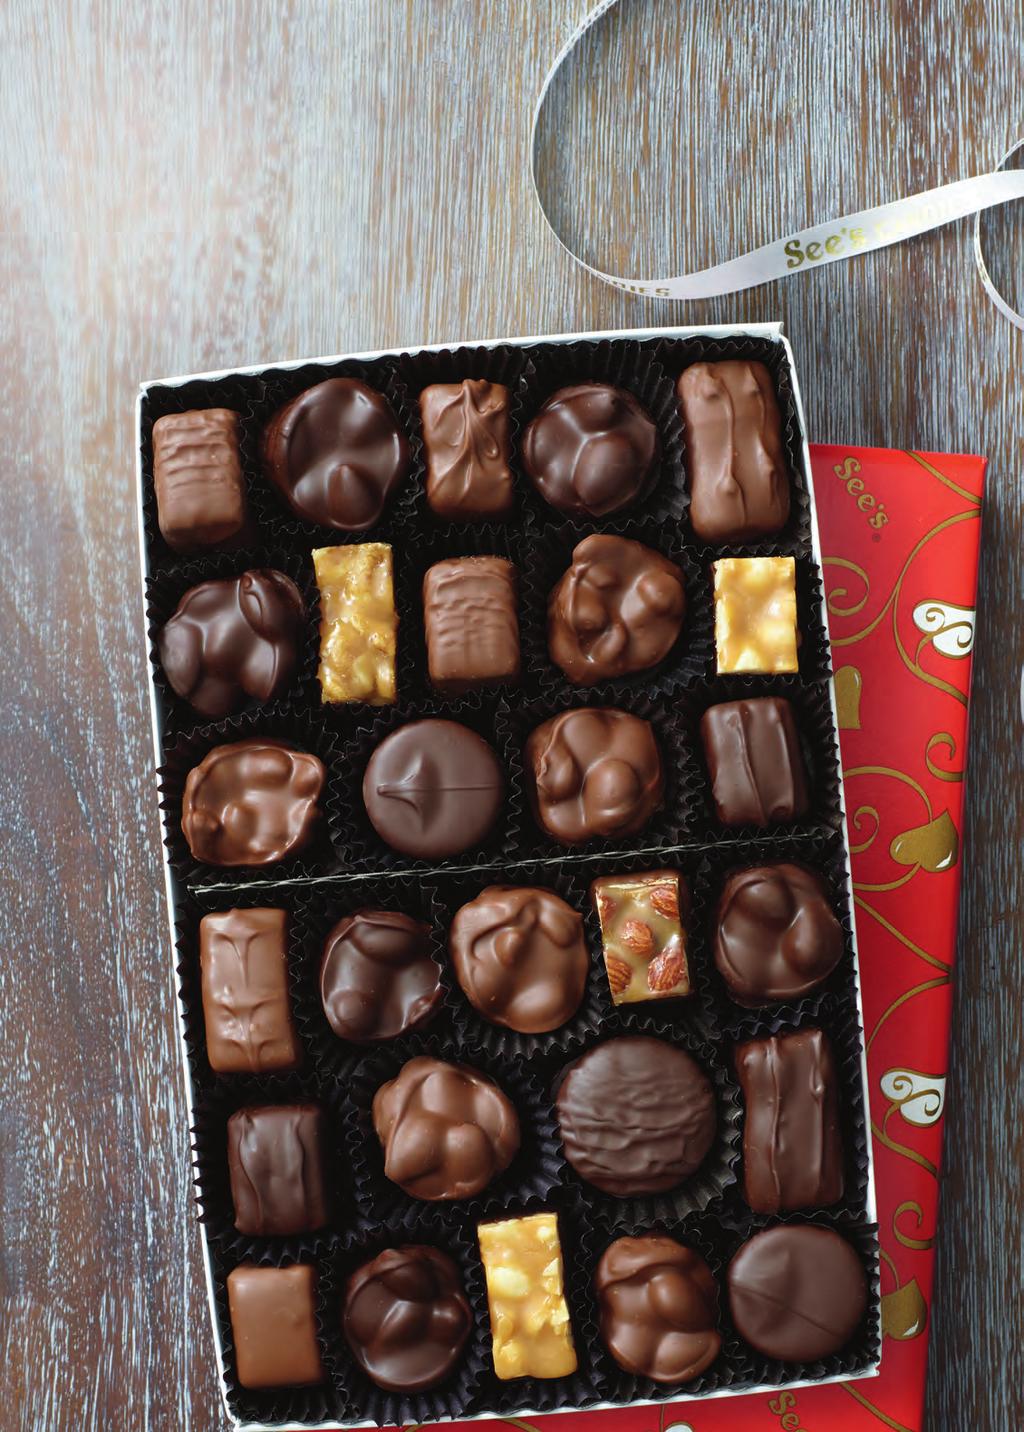 Nuts & Chews Deliciously crunchy and chewy. The perfect mix of flavor and texture, featuring plump walnuts, roasted almonds, creamy caramels and more, drenched in See s milk and dark chocolate.